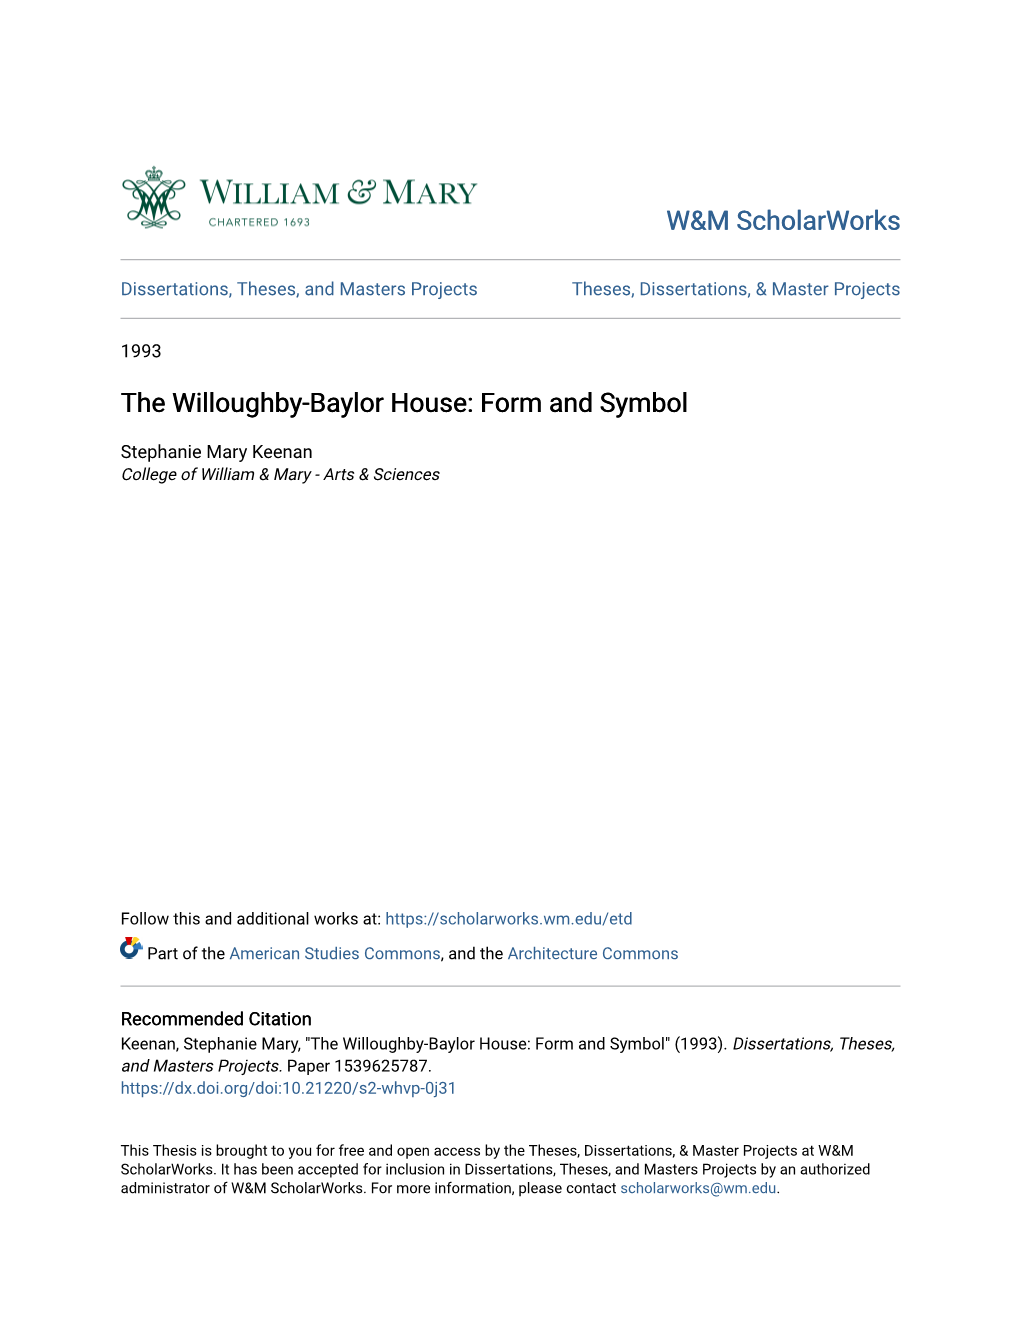 The Willoughby-Baylor House: Form and Symbol